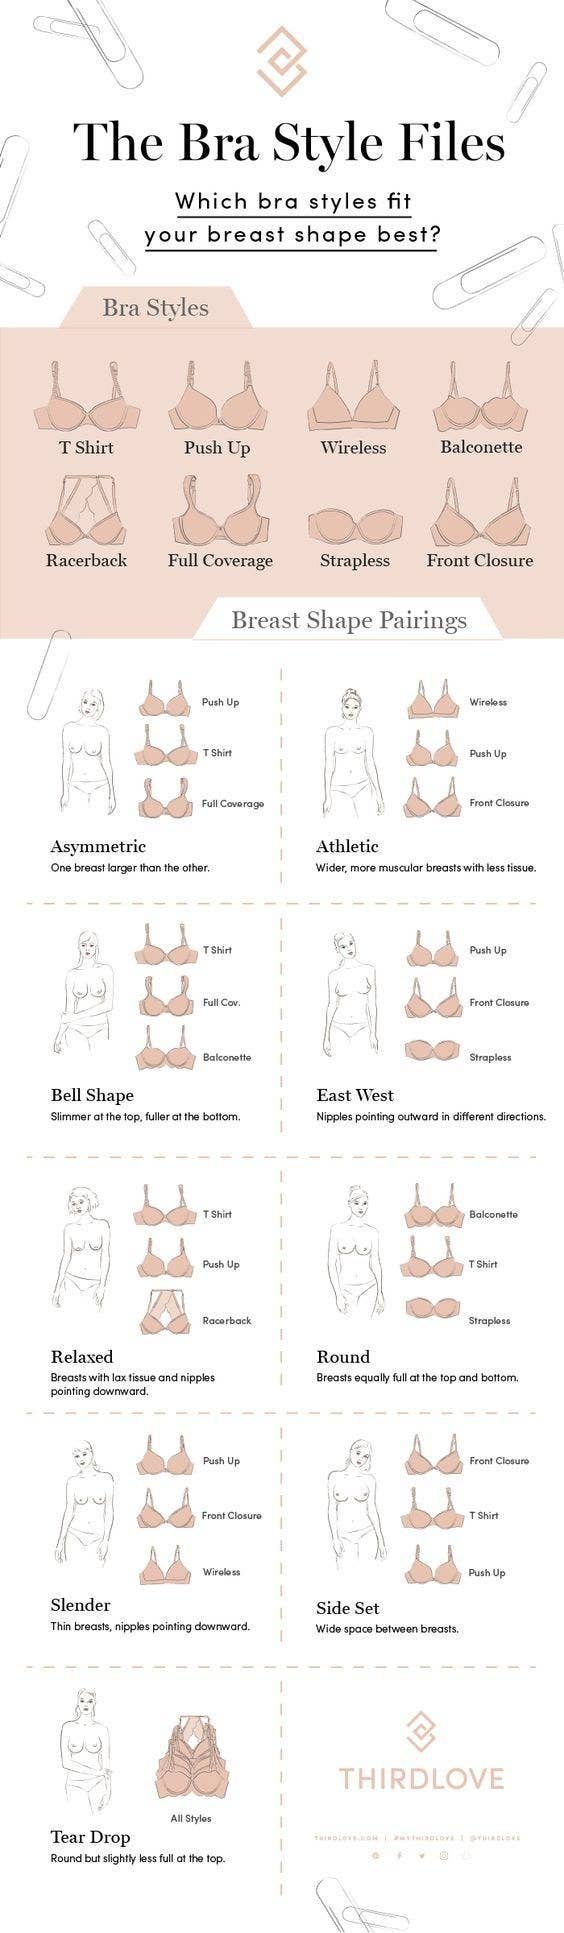 Bras suitable for every type of breast shape